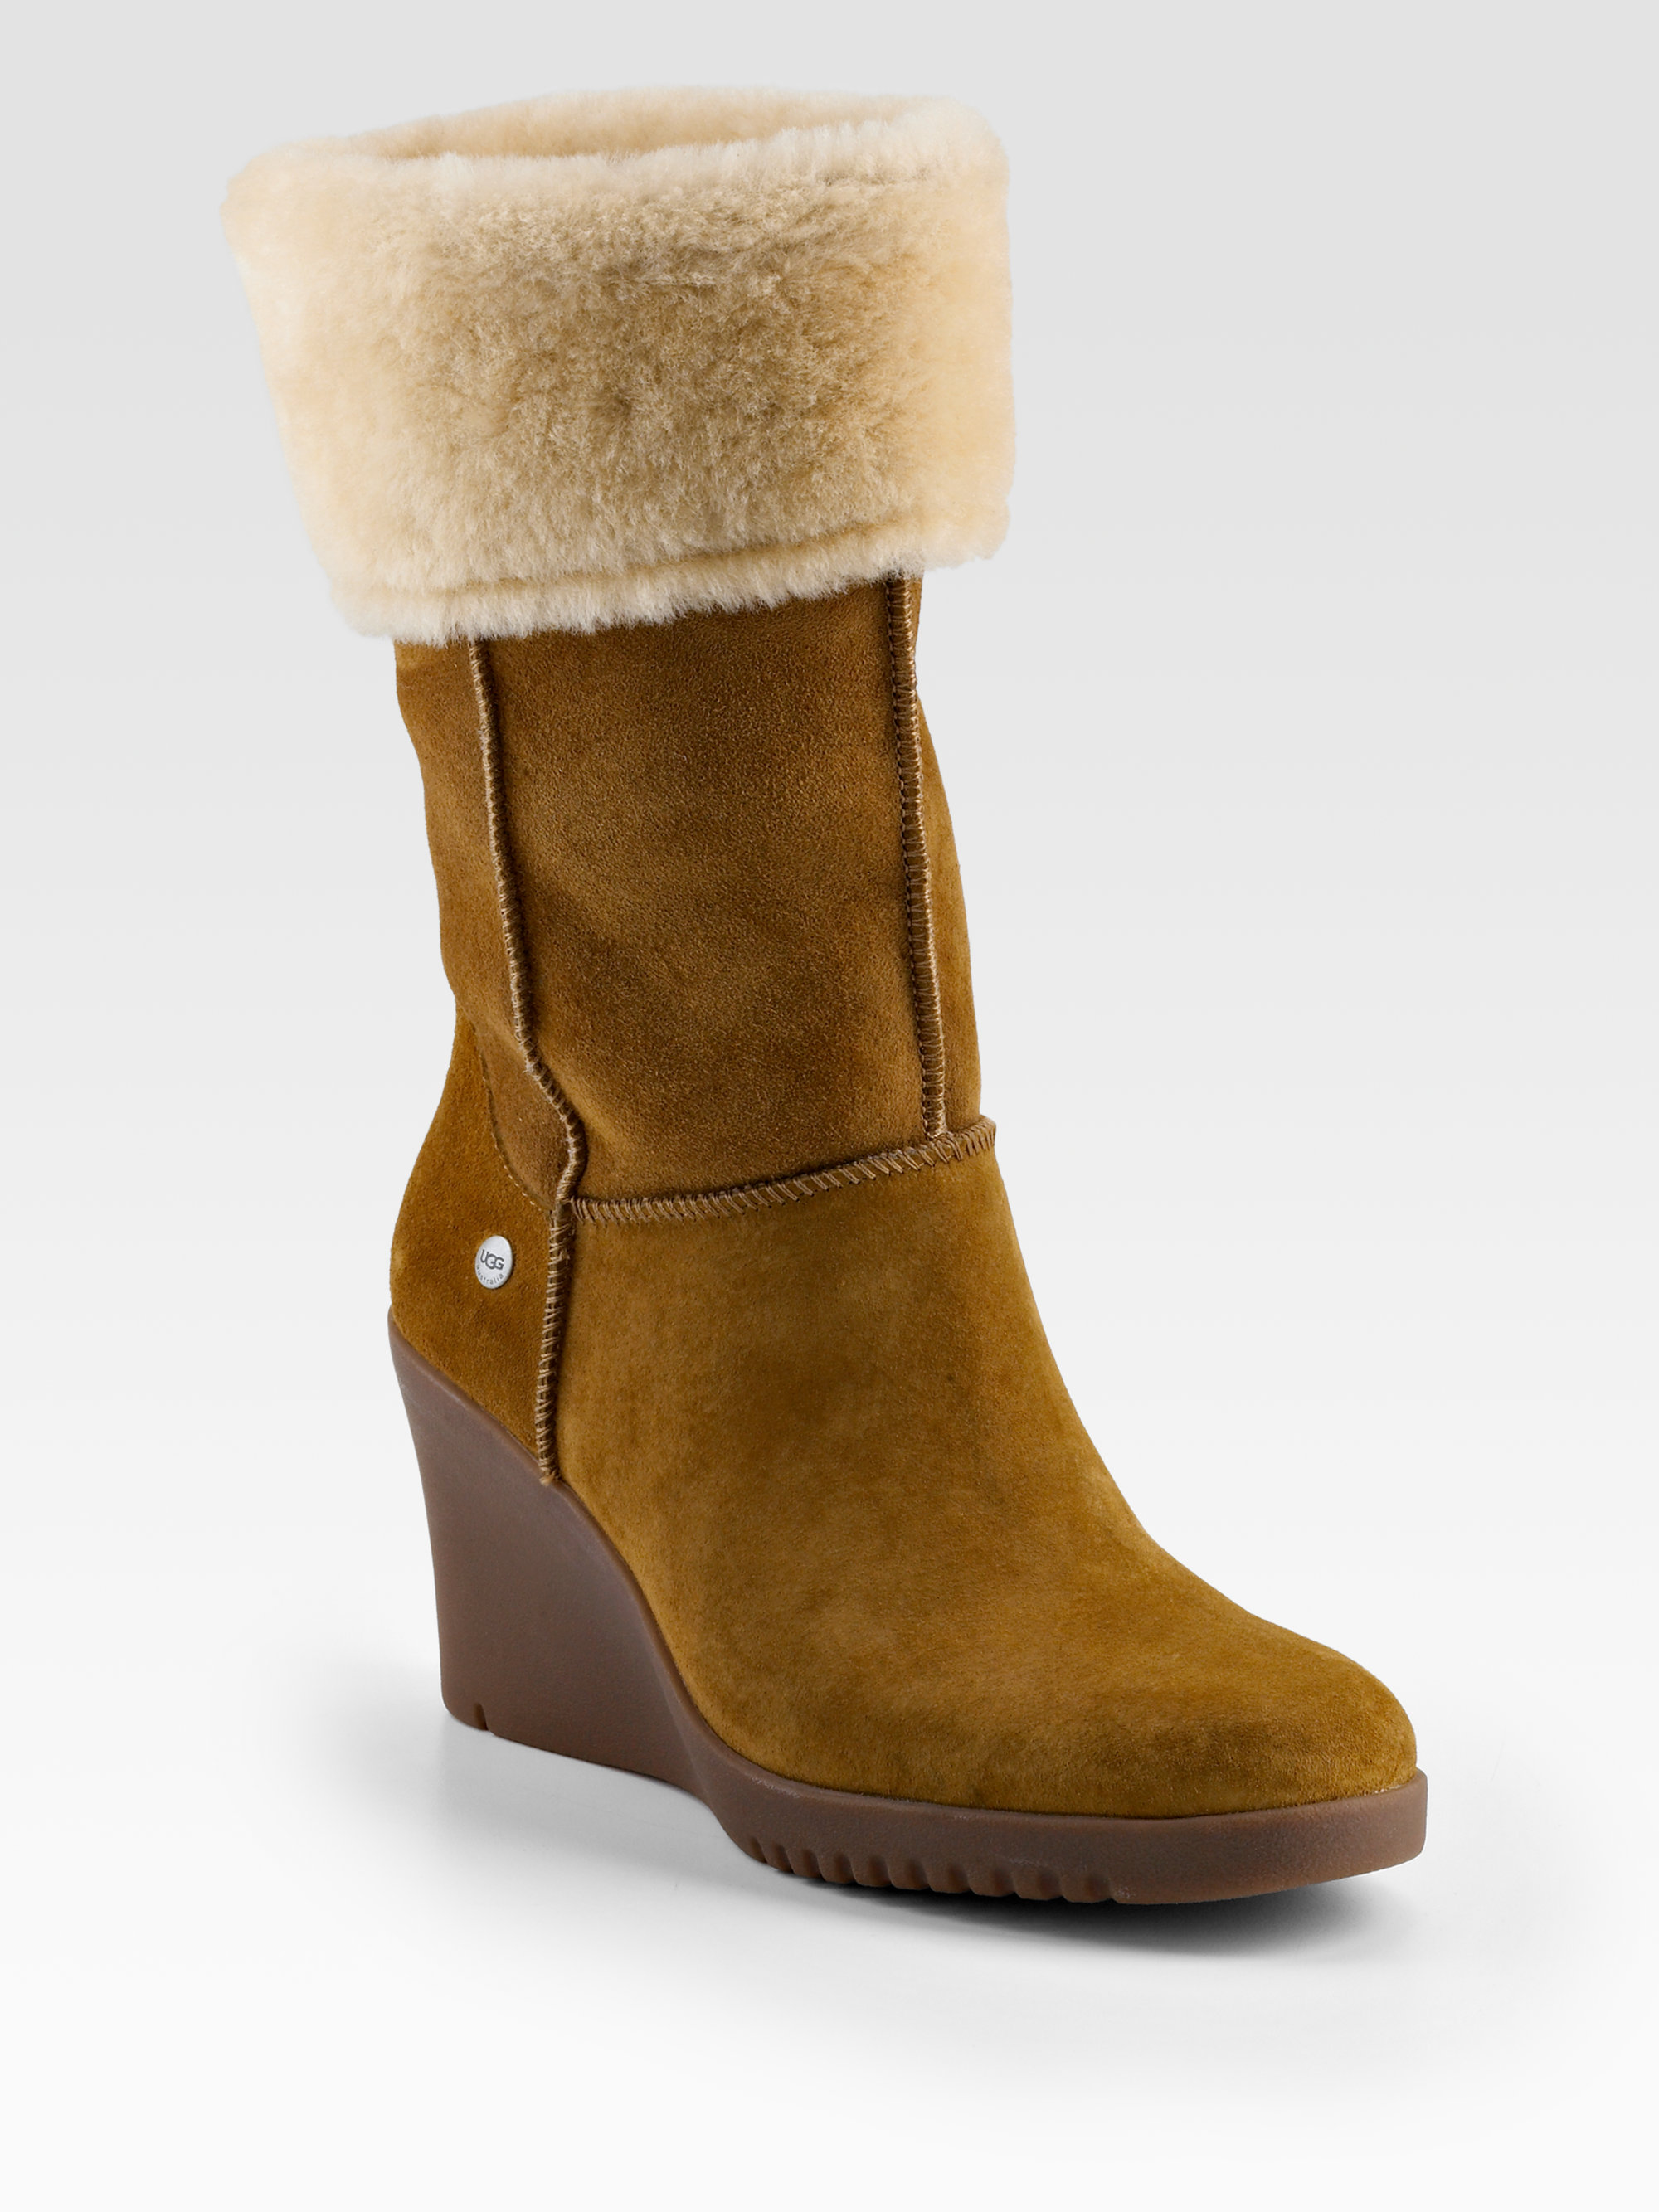 UGG Shearling Cuff Suede Wedge Boots in Chestnut (Brown) | Lyst